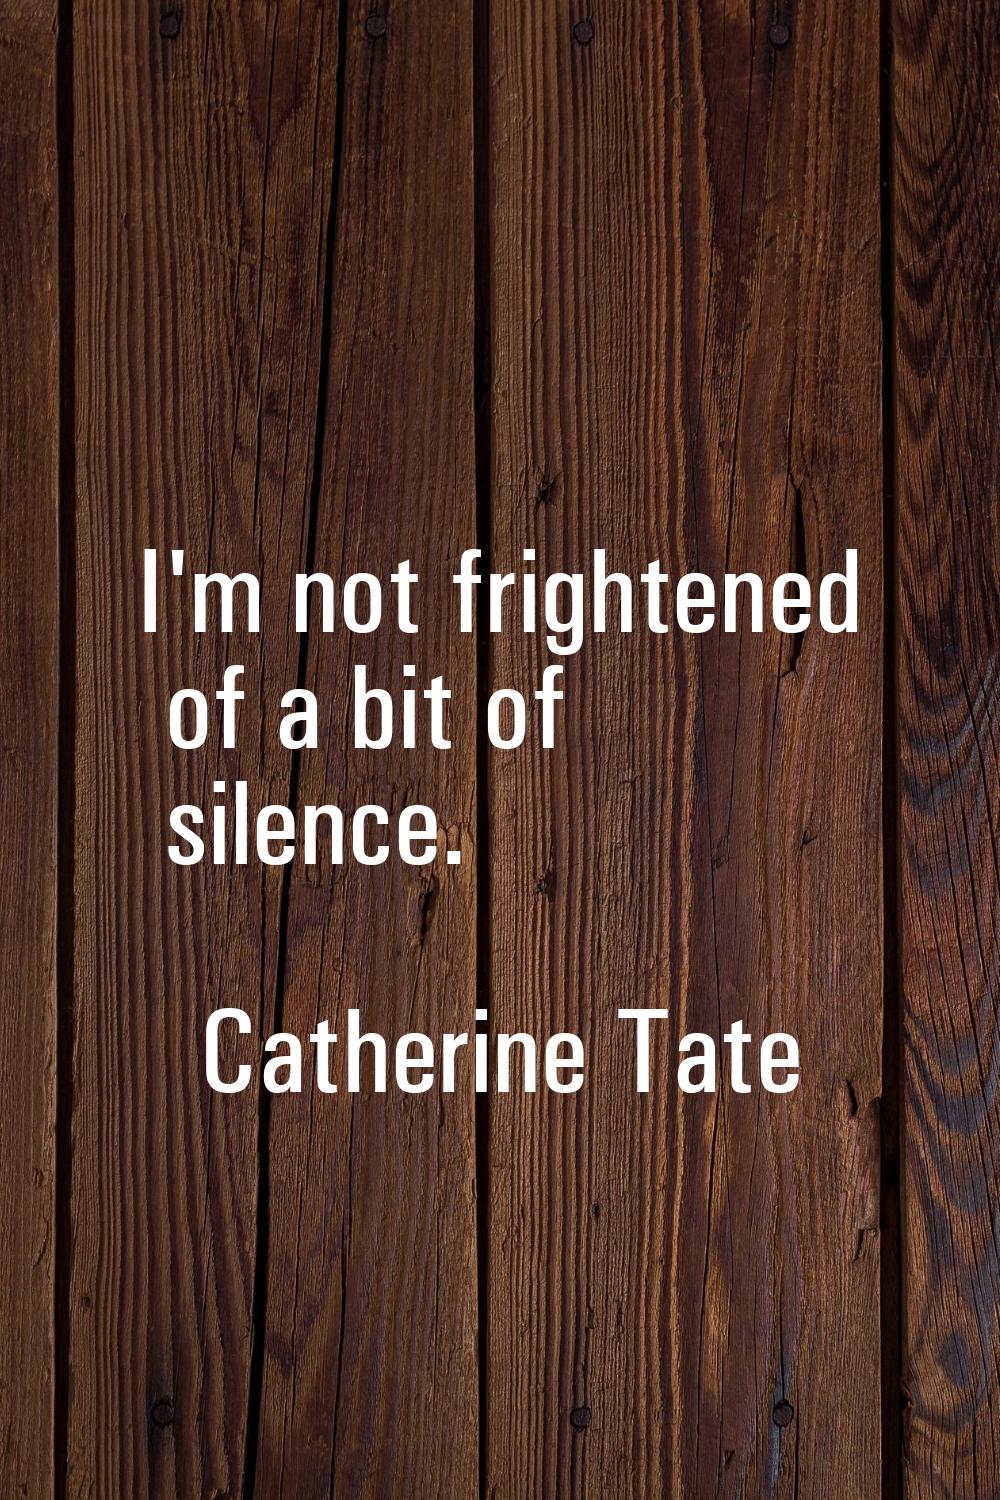 I'm not frightened of a bit of silence.